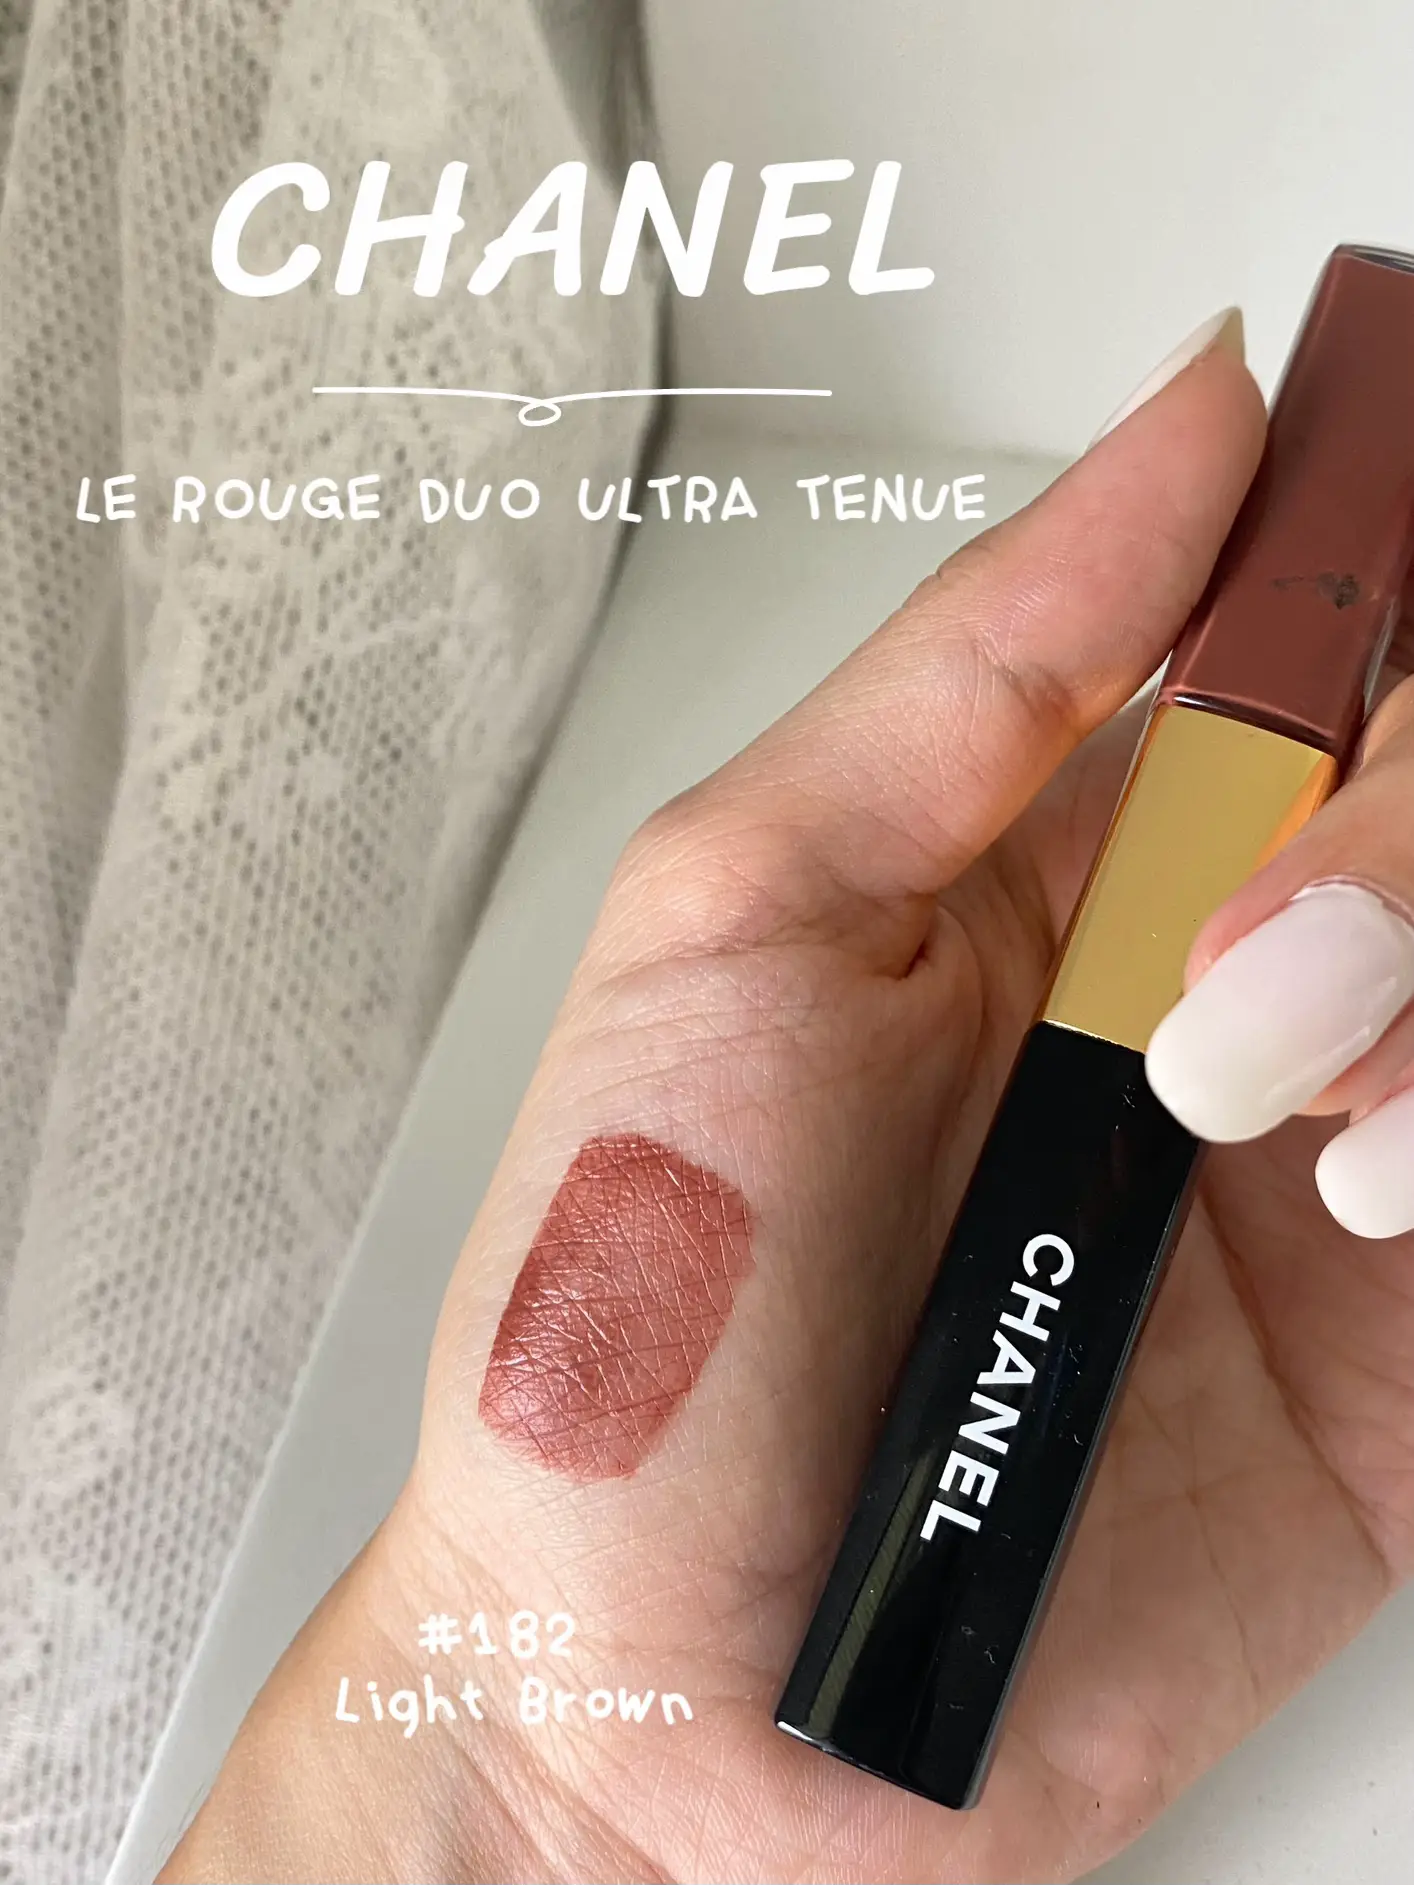 Sugar Lip Tone Chanel Le Rouge Duo, Gallery posted by Summer.ts